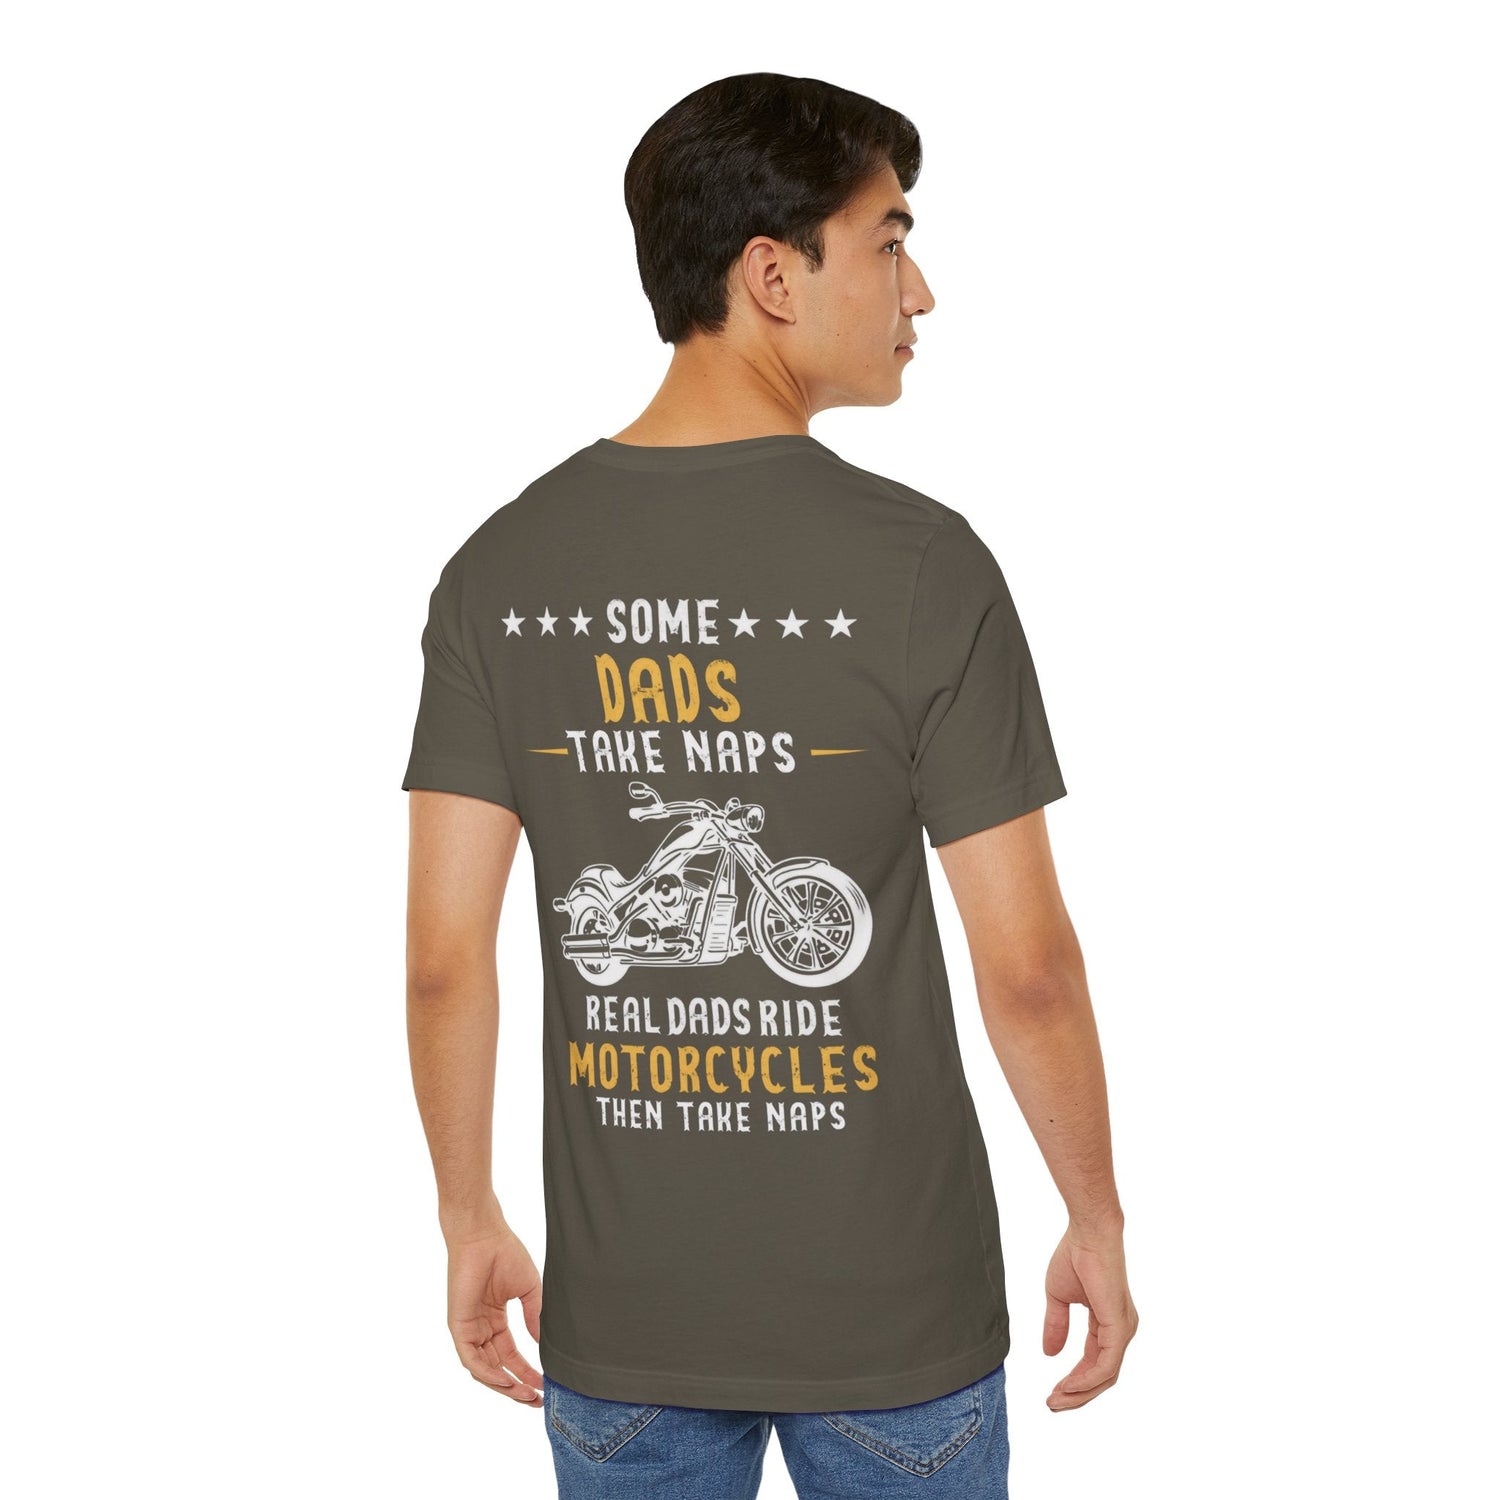 Kate McEnroe New York Biker Dad Shirt For Fathers day, Birthday Gift, Real Dads Ride Motorcycles Then Take Naps Shirt, Funny Biker Shirt, Dad GiftT - Shirt29770878460498064241